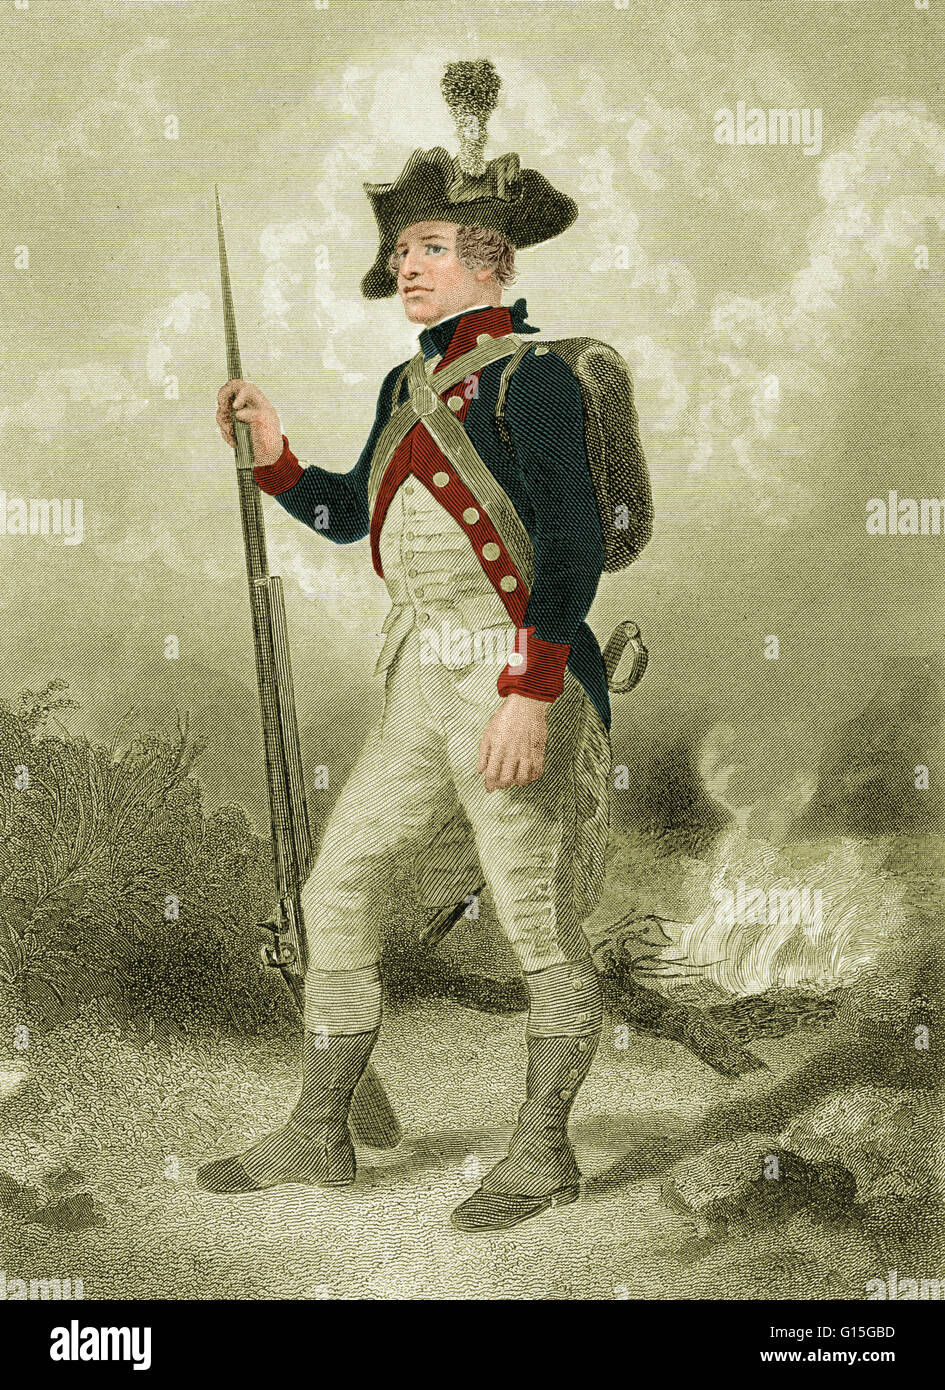 American Continental soldier, c. 1775.  Engraved by John C. McRae from a painting by Alonzo Chappel (1828-1887).  The American Continental Army was formed after the outbreak of the American Revolutionary War by the Thirteen American Colonies.  George Wash Stock Photo